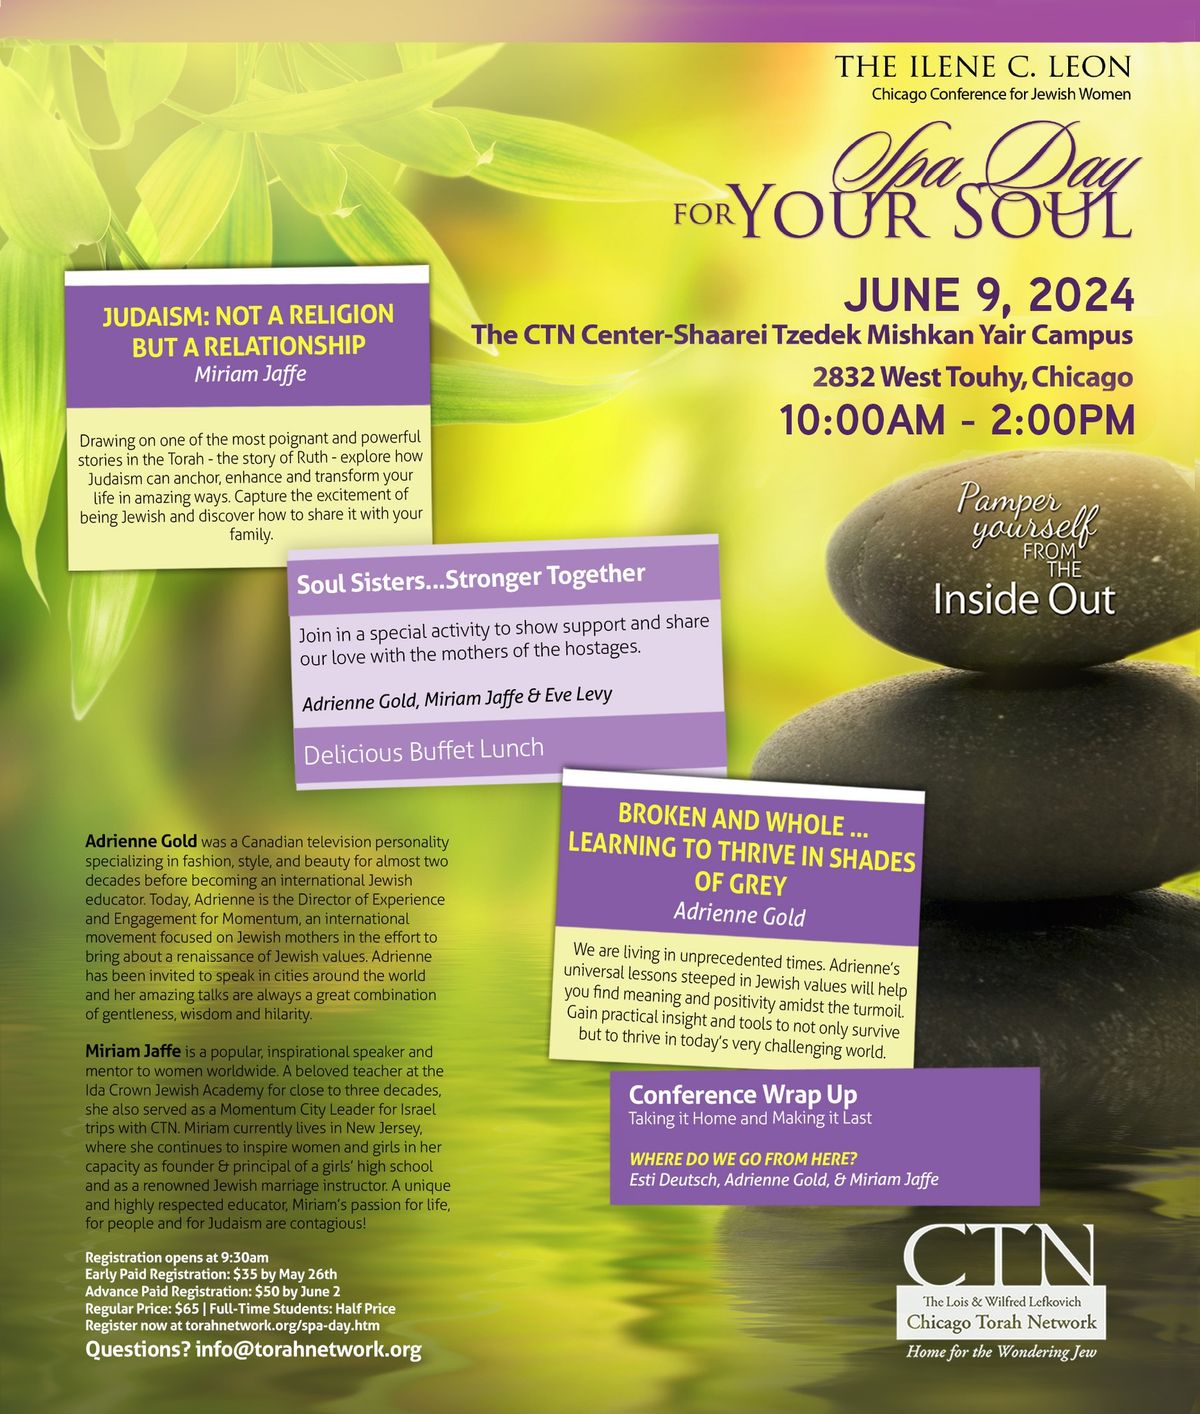 The Ilene C Leon Spa Day for Your Soul 2024 